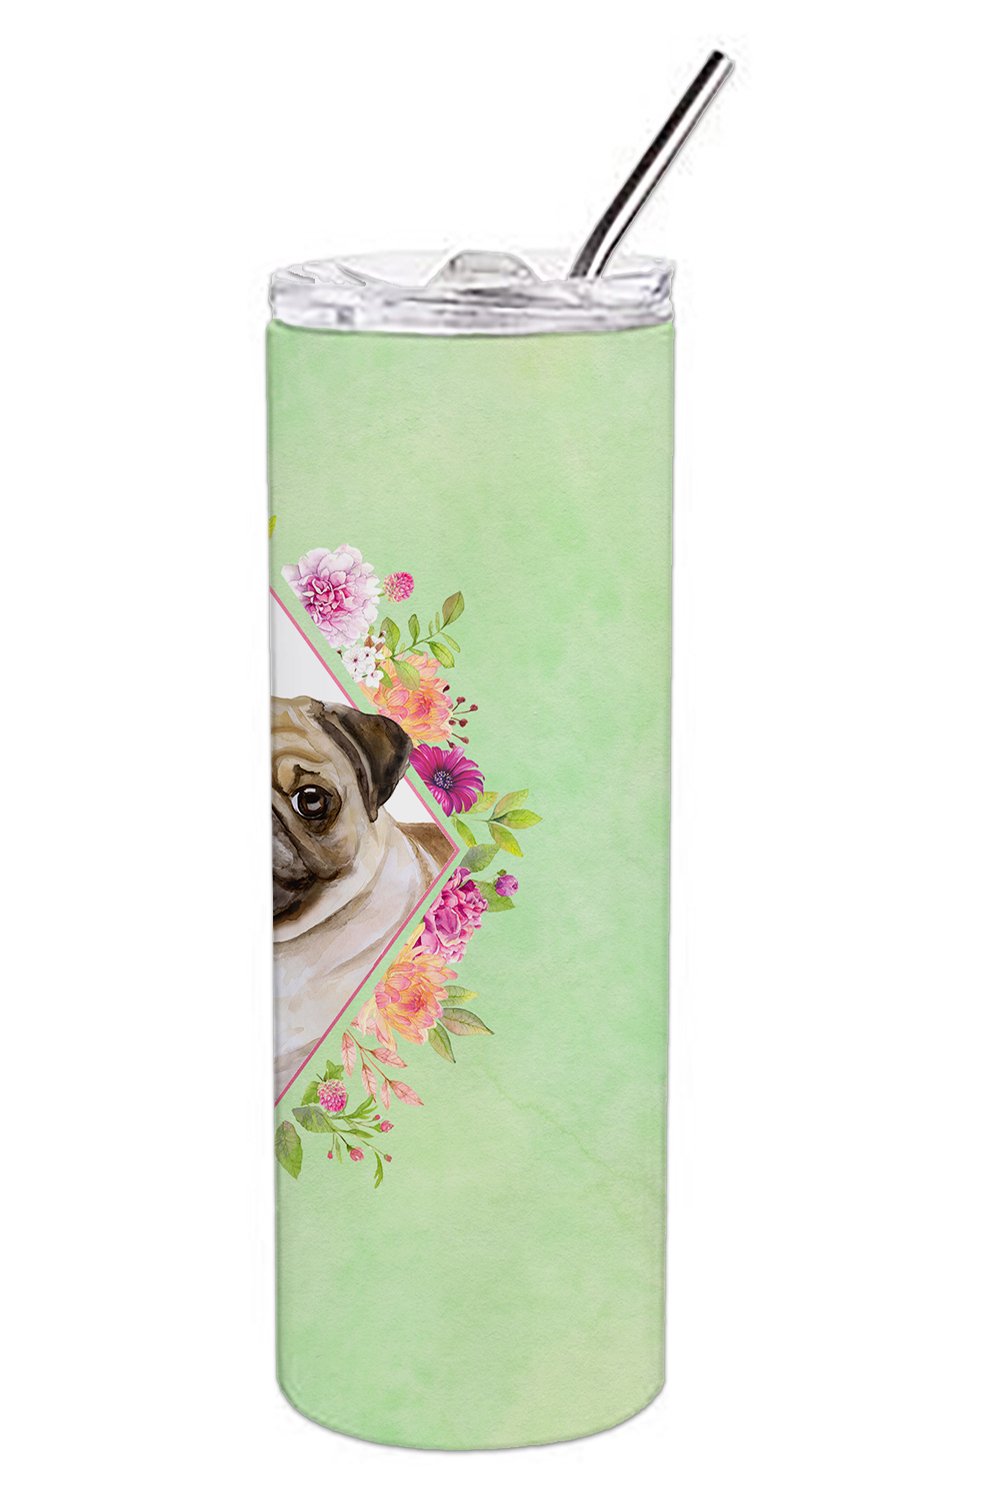 Fawn Pug Green Flowers Double Walled Stainless Steel 20 oz Skinny Tumbler CK4334TBL20 by Caroline's Treasures